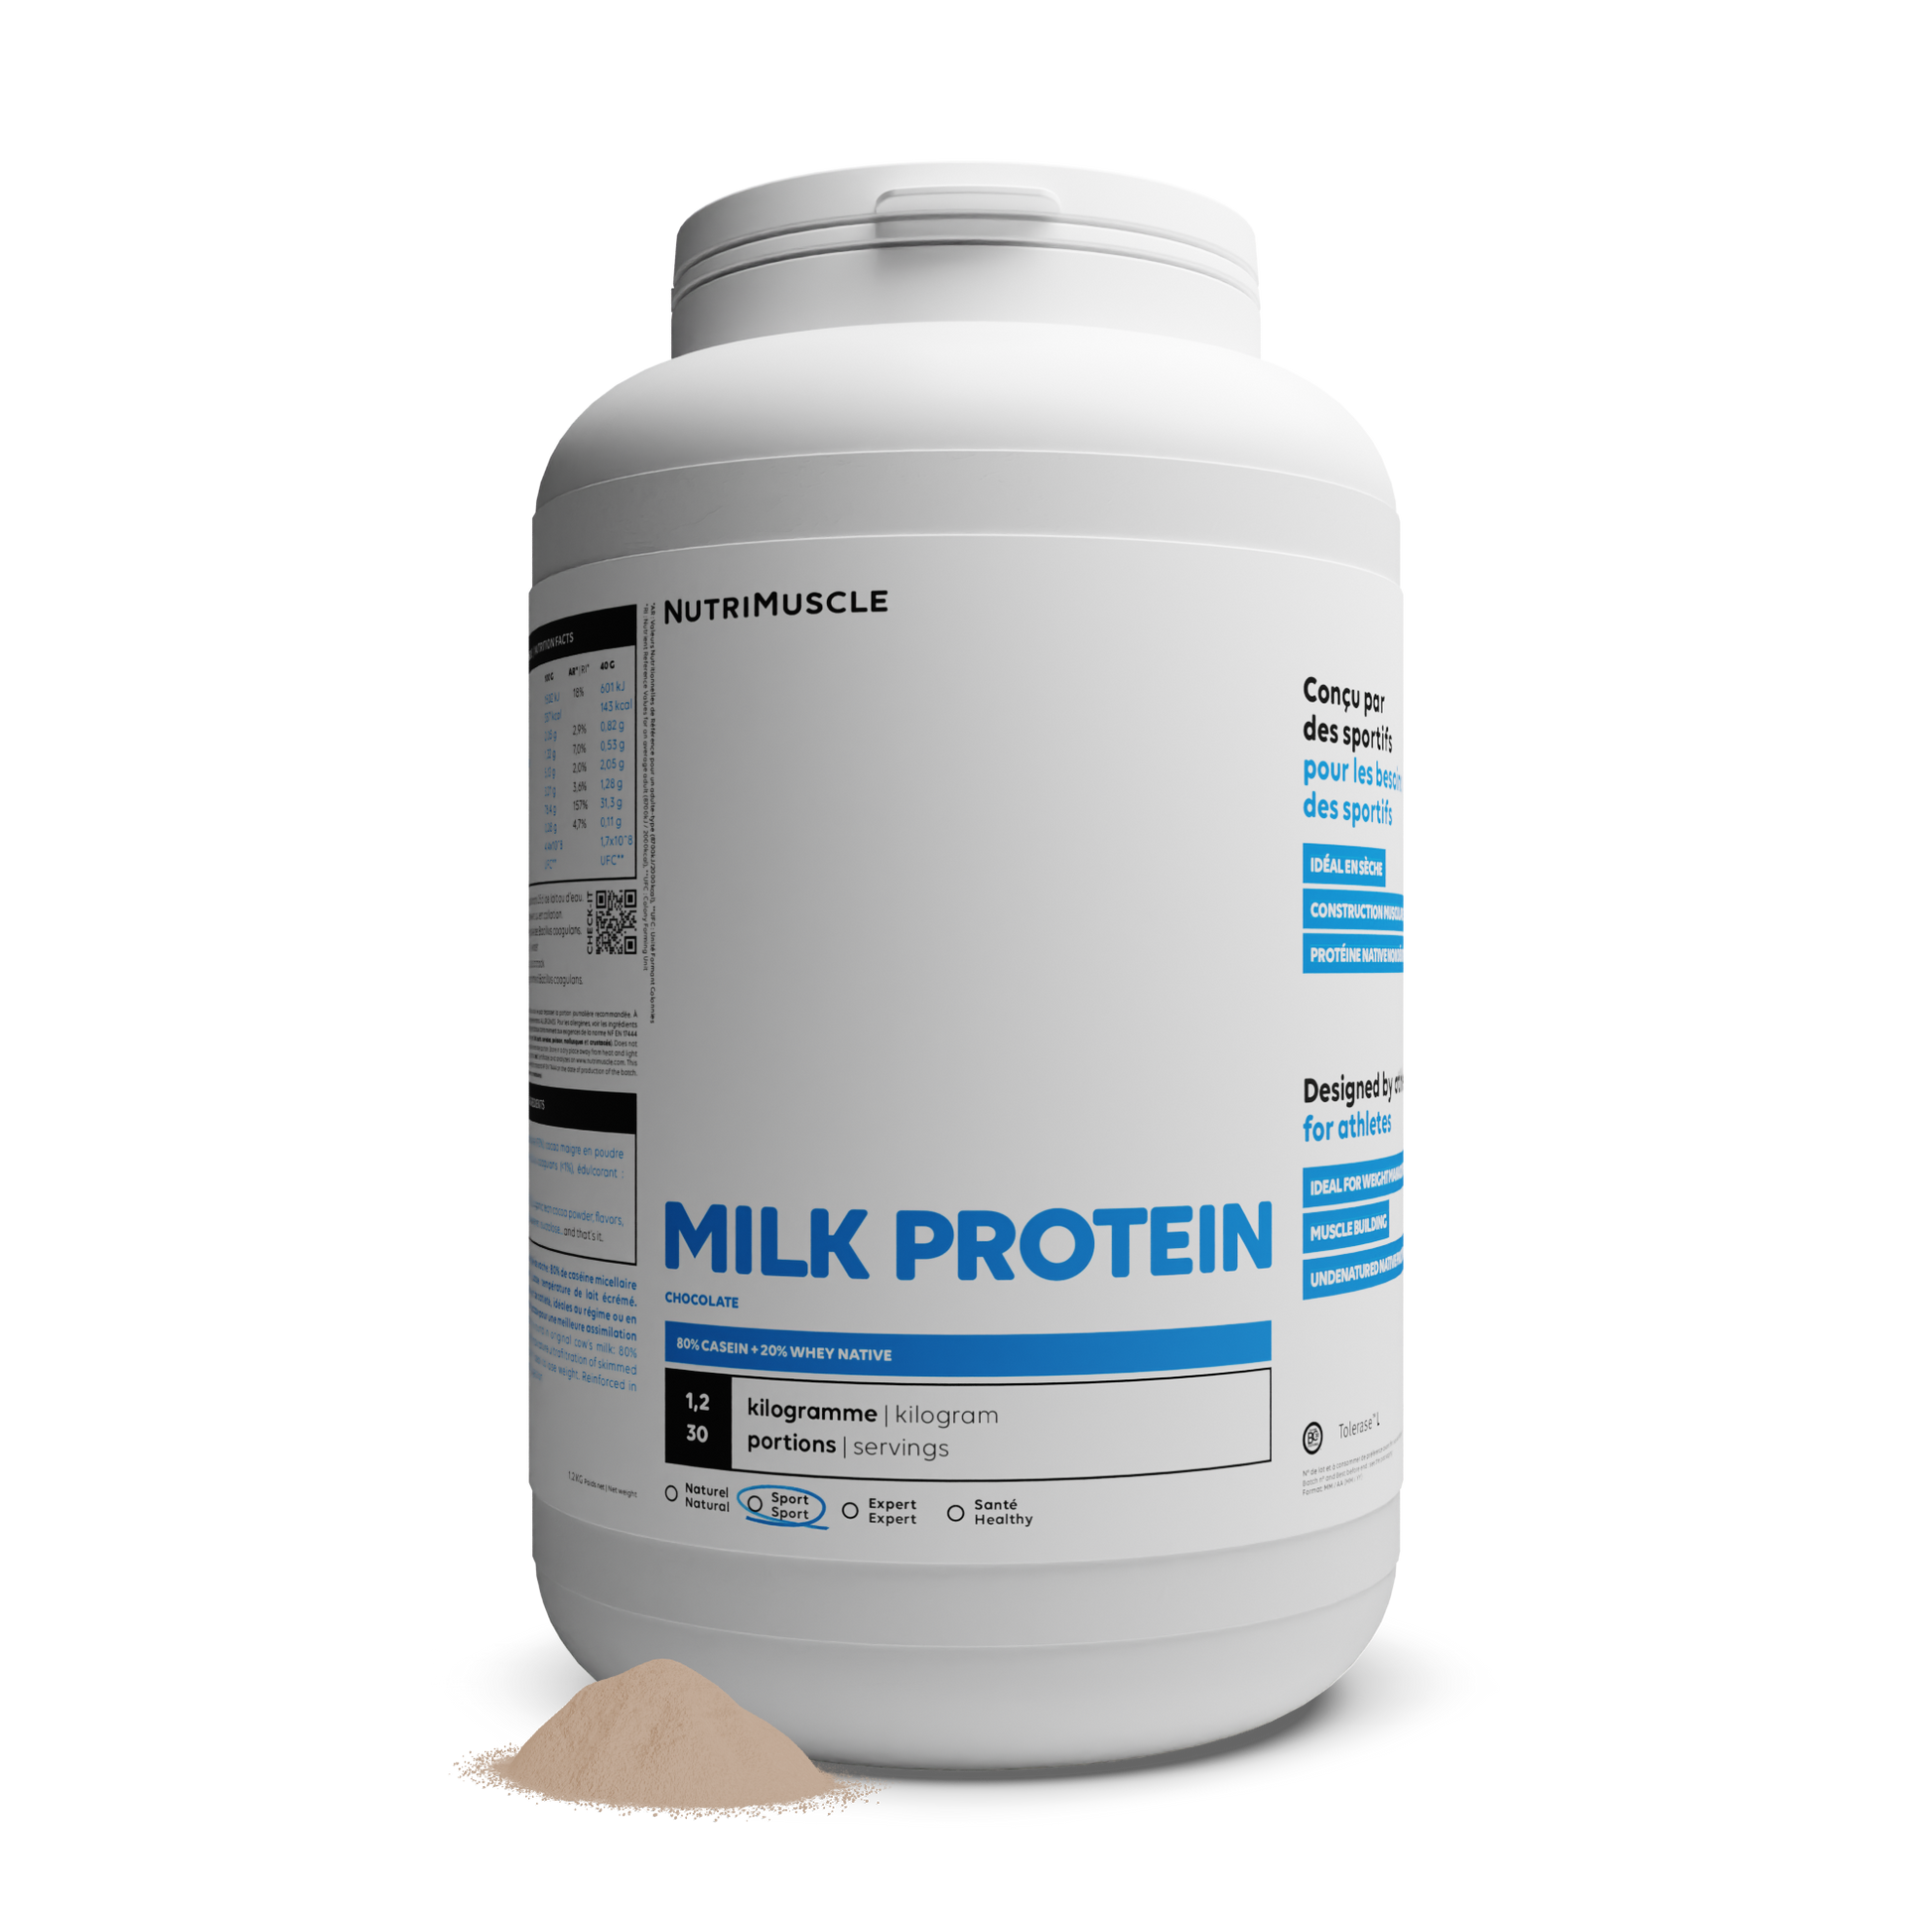 Total protein